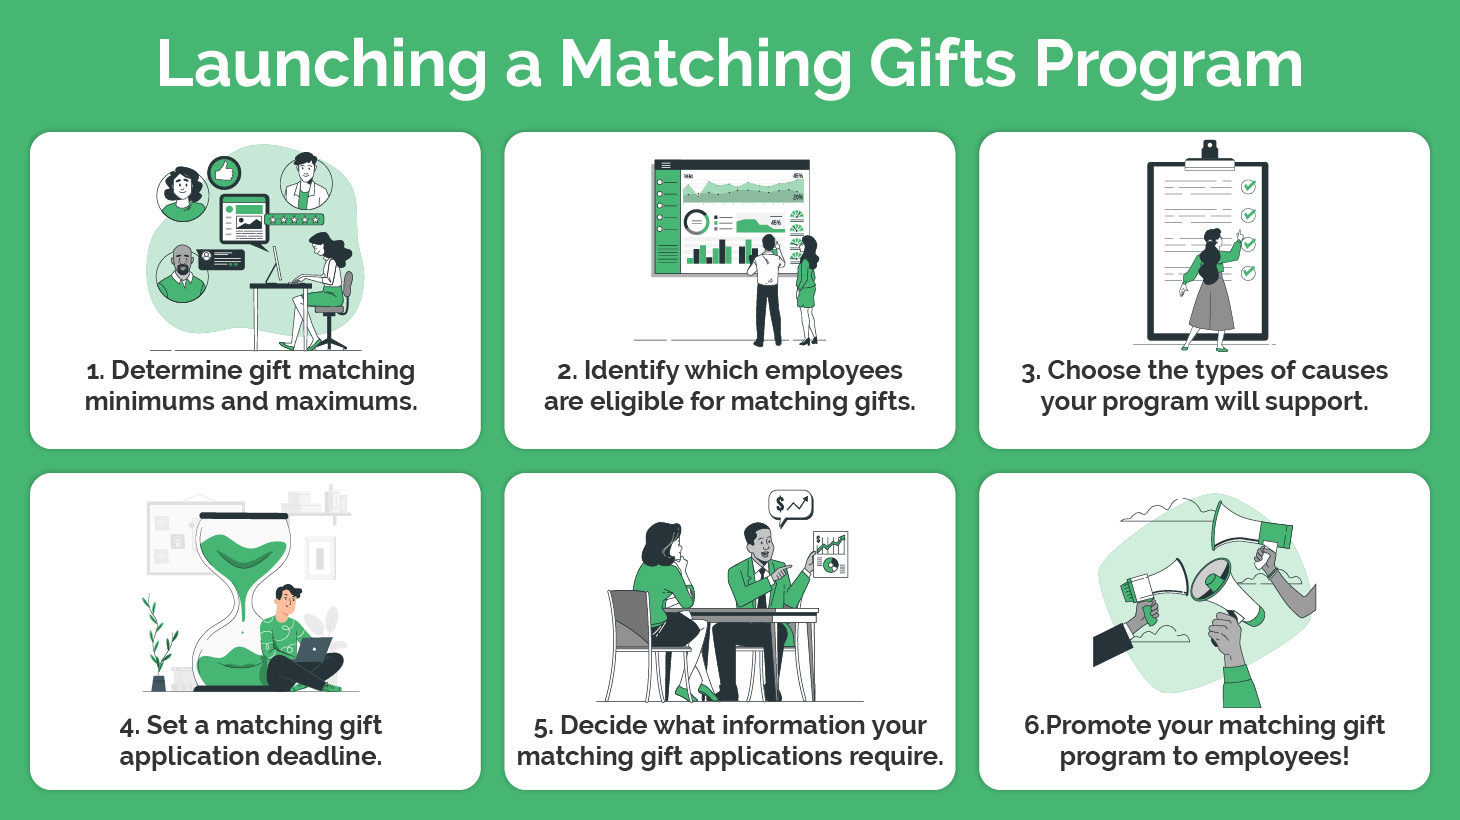 The image shows the steps for starting a matching gift program written out in this section.